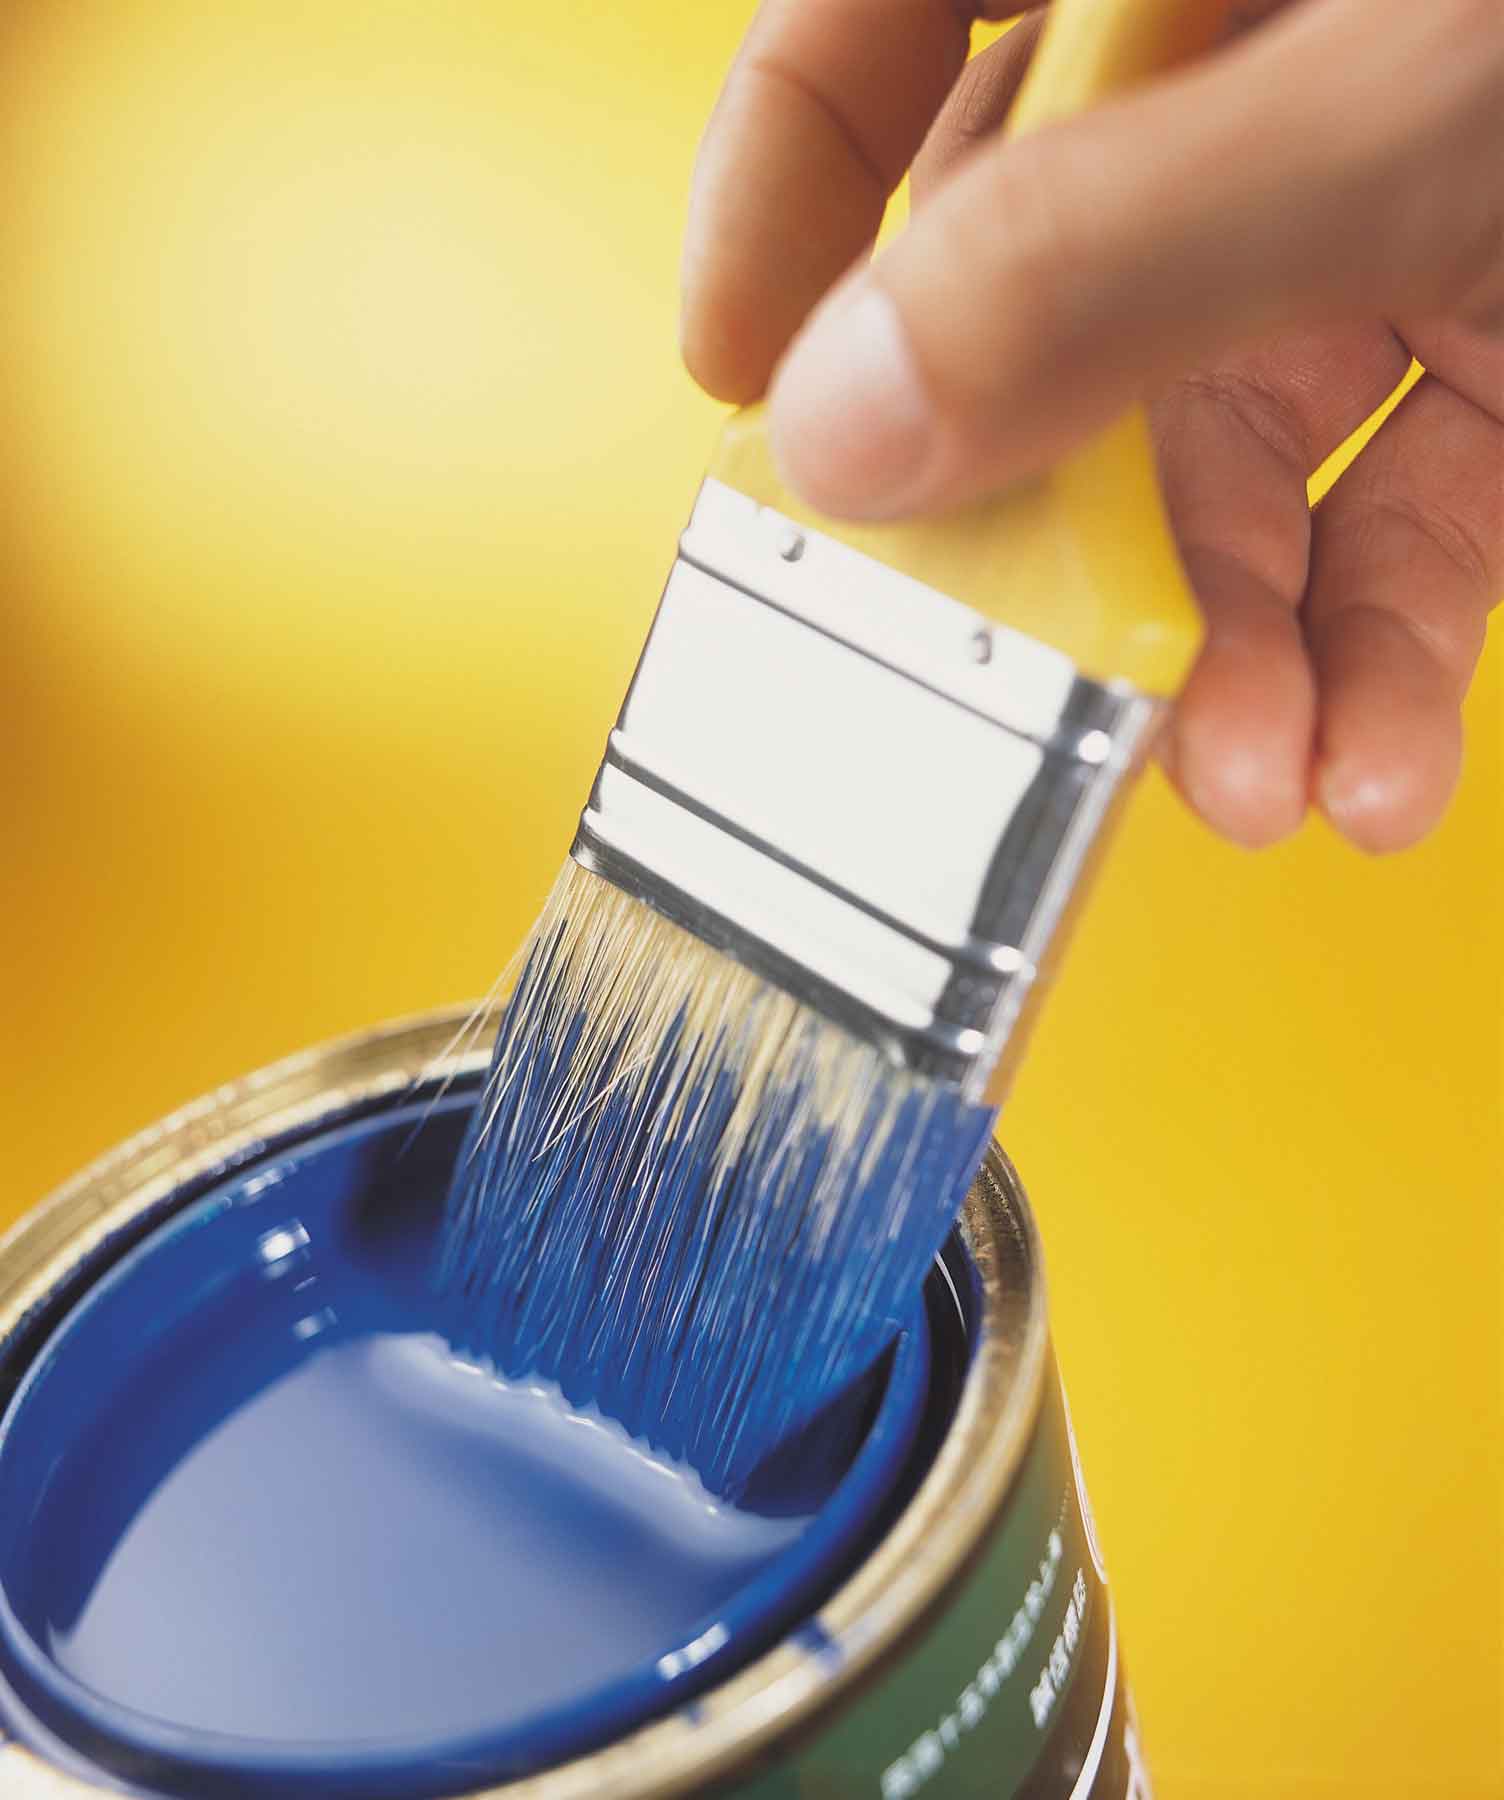 Cleaning & Storage of Paint Brushes & Rollers |GT Painters Sydney